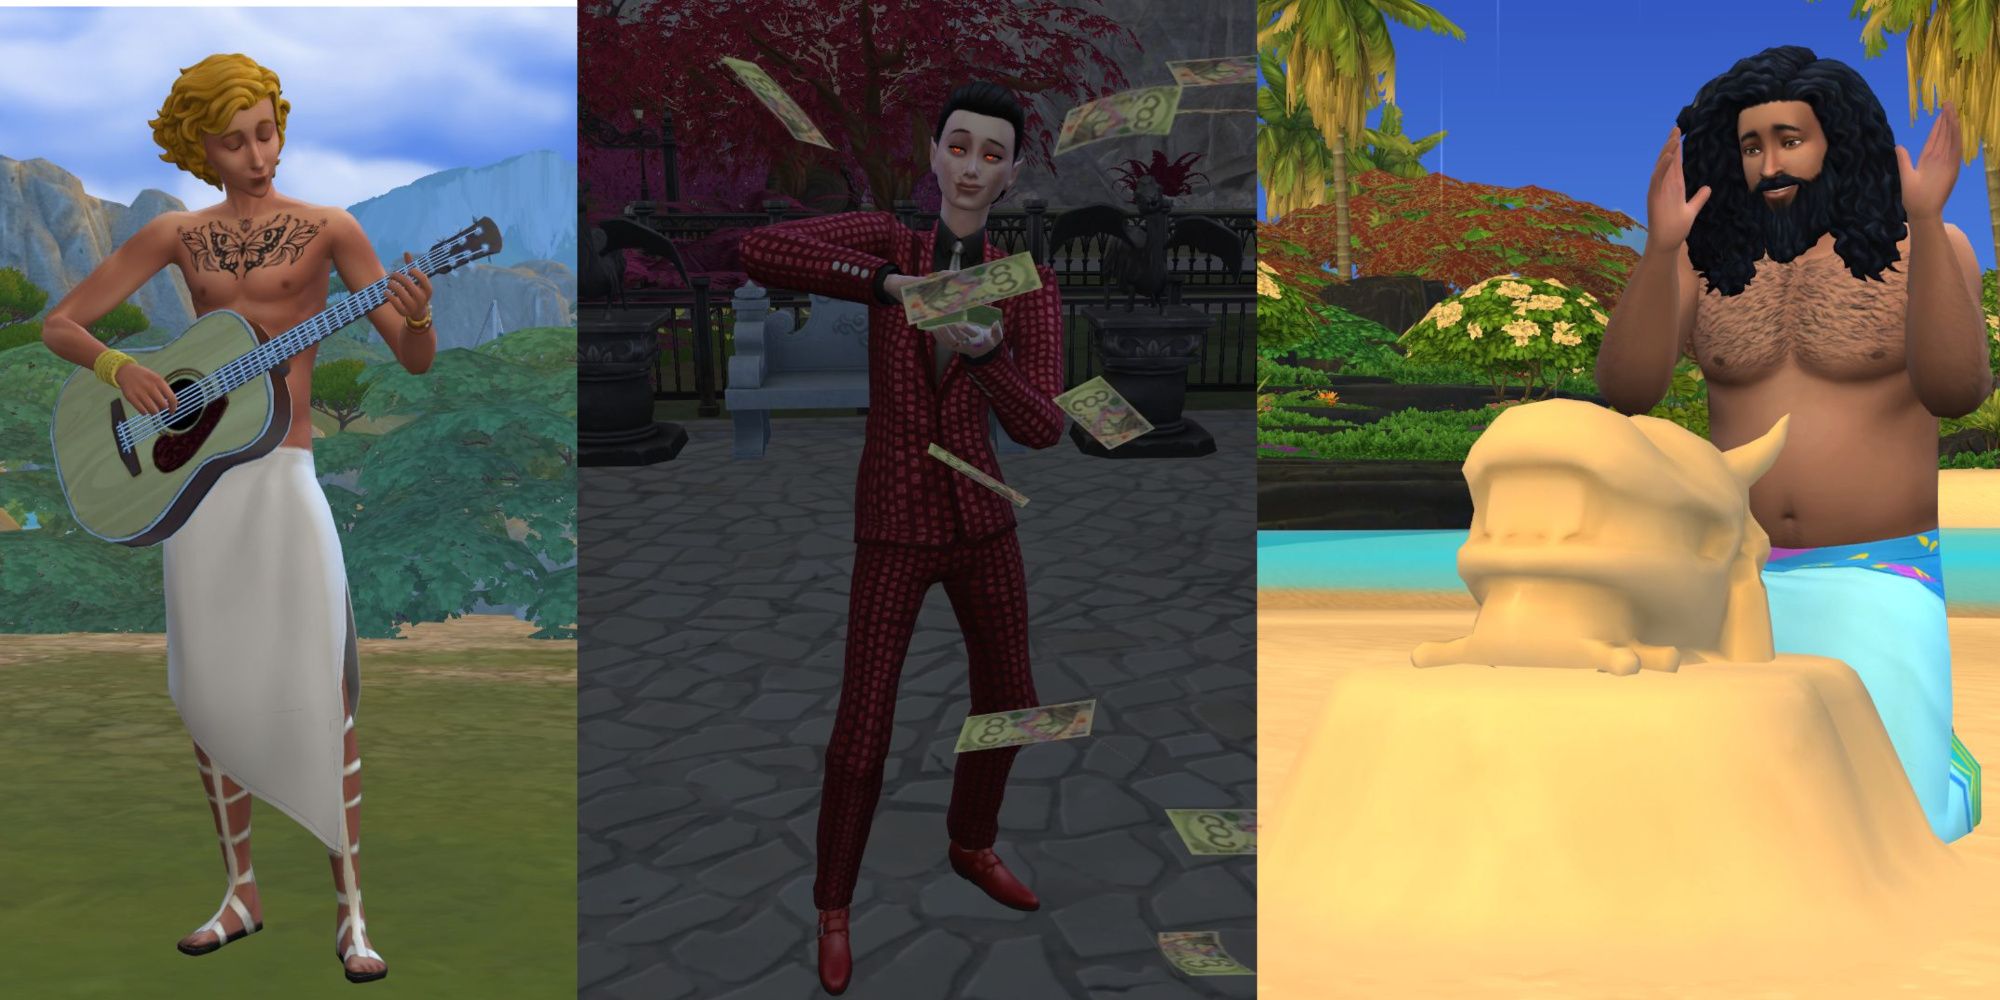 Images of three Sims- the first one is a blonde young man playing guitar, the second is a dark-haired sickly man throwing money at the camera, and the third is a dark-haired muscular man building a sand snail.